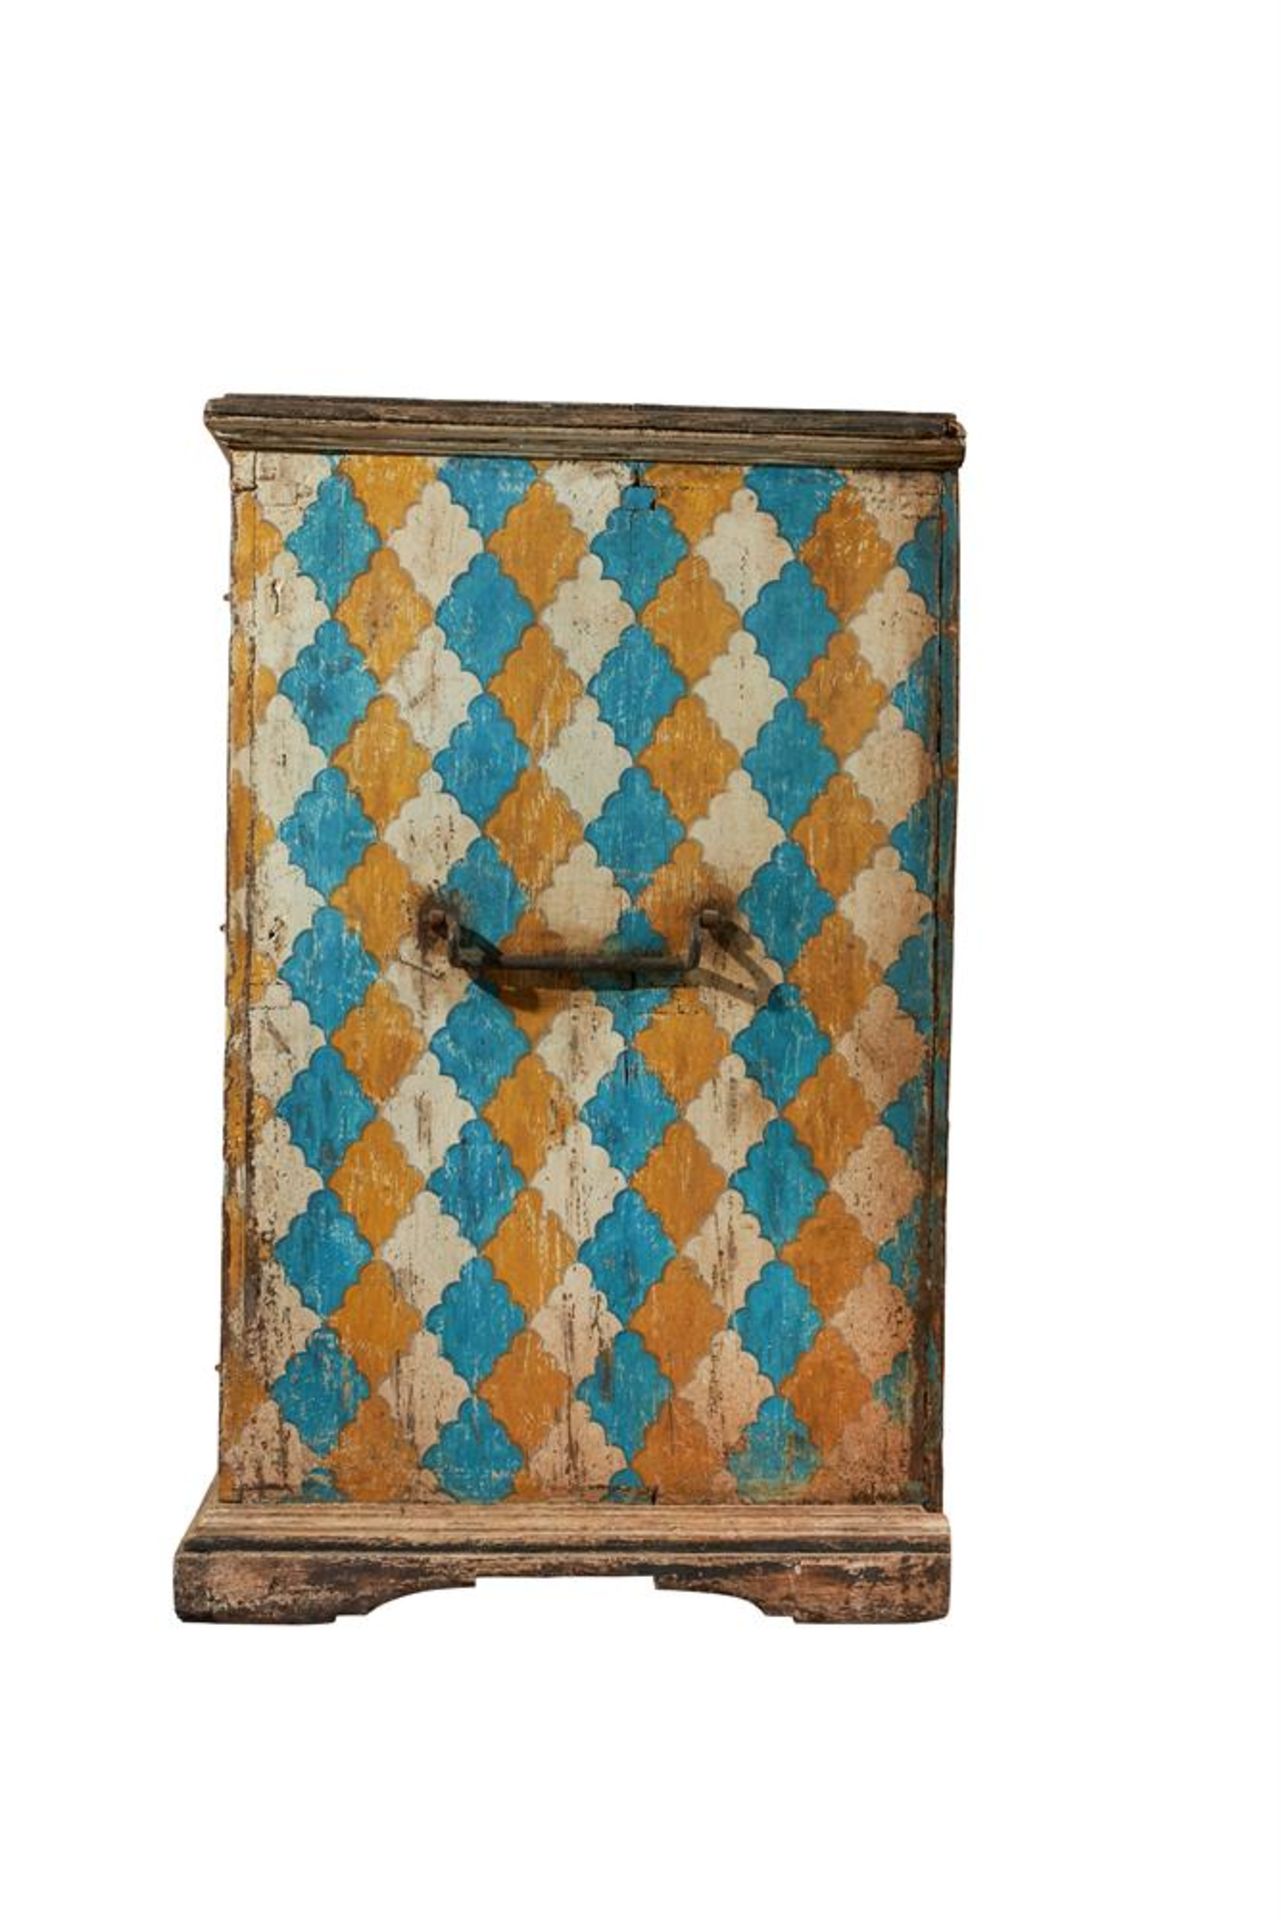 AN ITALIAN PAINTED SIDE CABINET, PROBABLY TUSCAN, 18TH CENTURY - Image 4 of 17